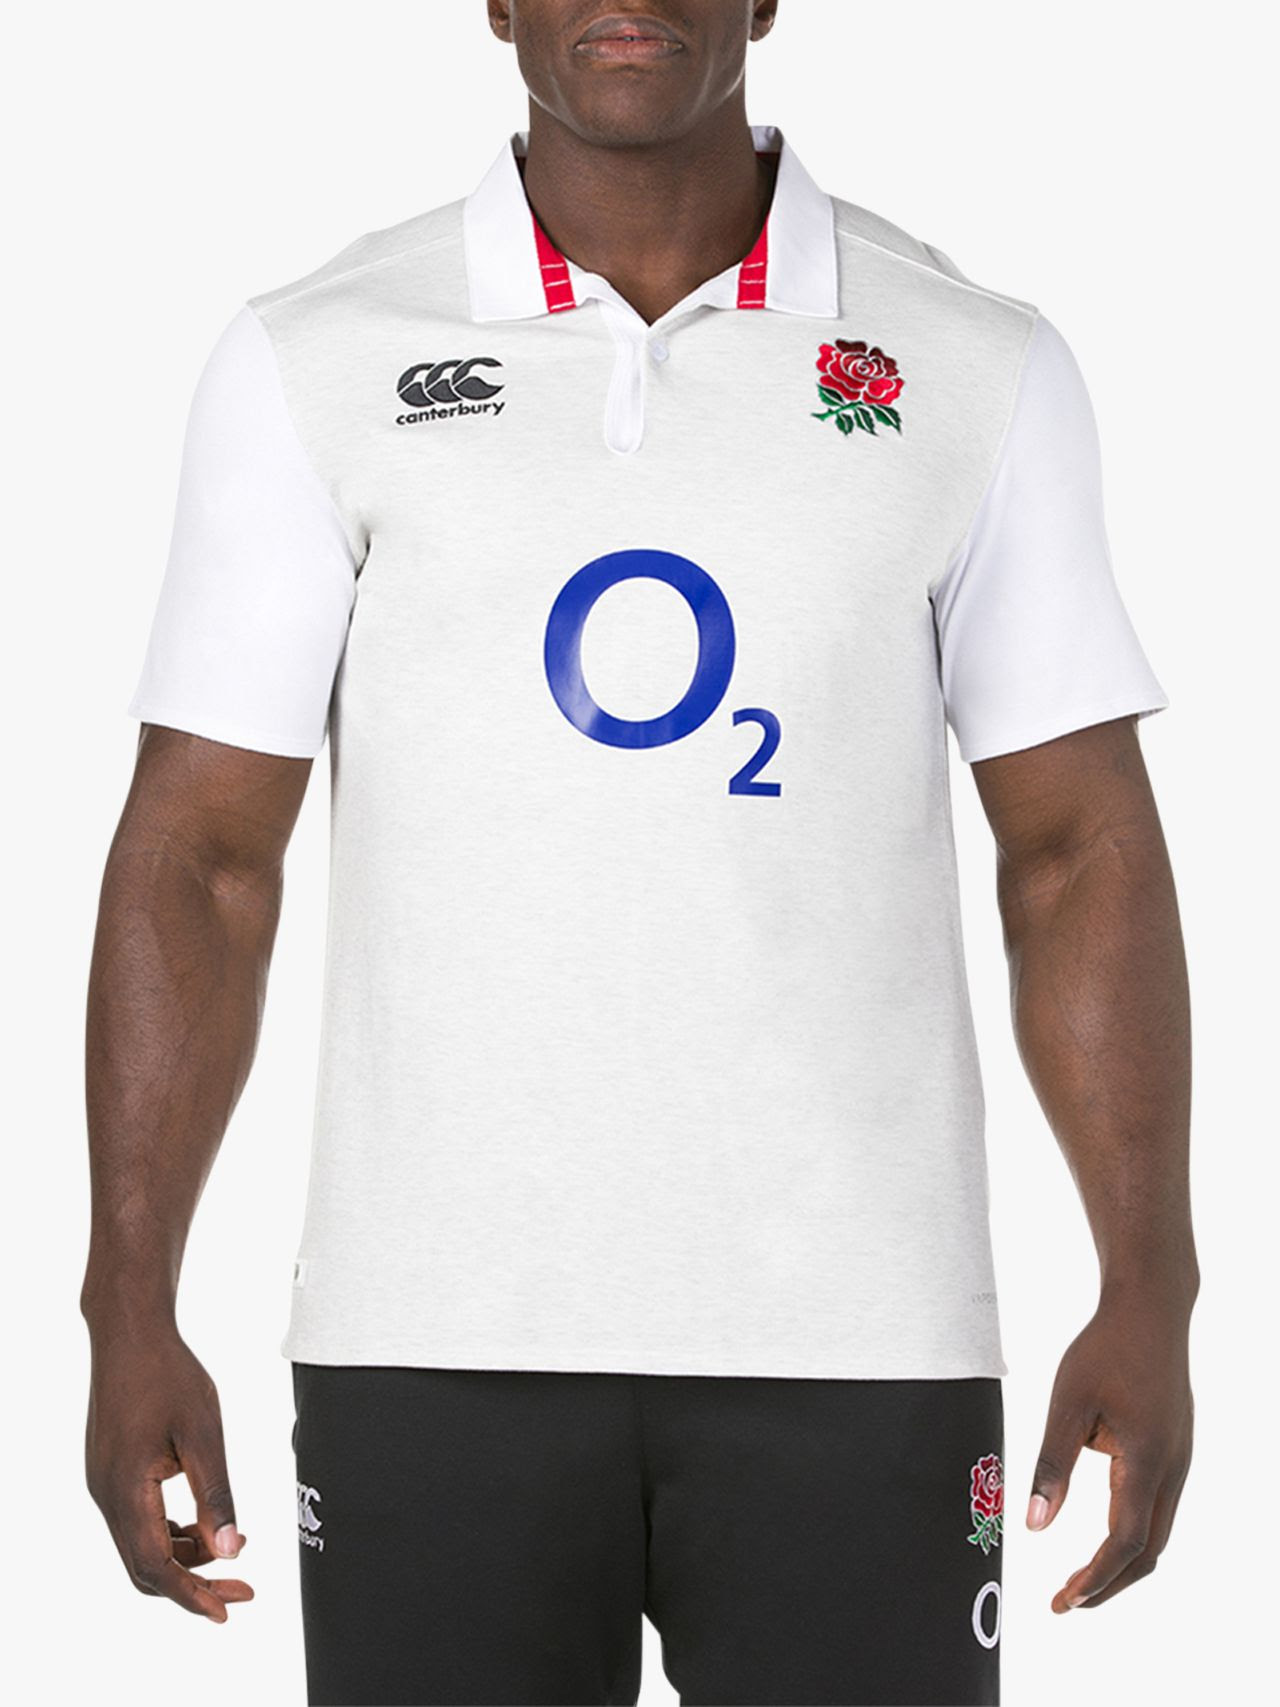 New Size 8y Canterbury Vapodri Graphic SS Top England Rugby Boy's Shirt 